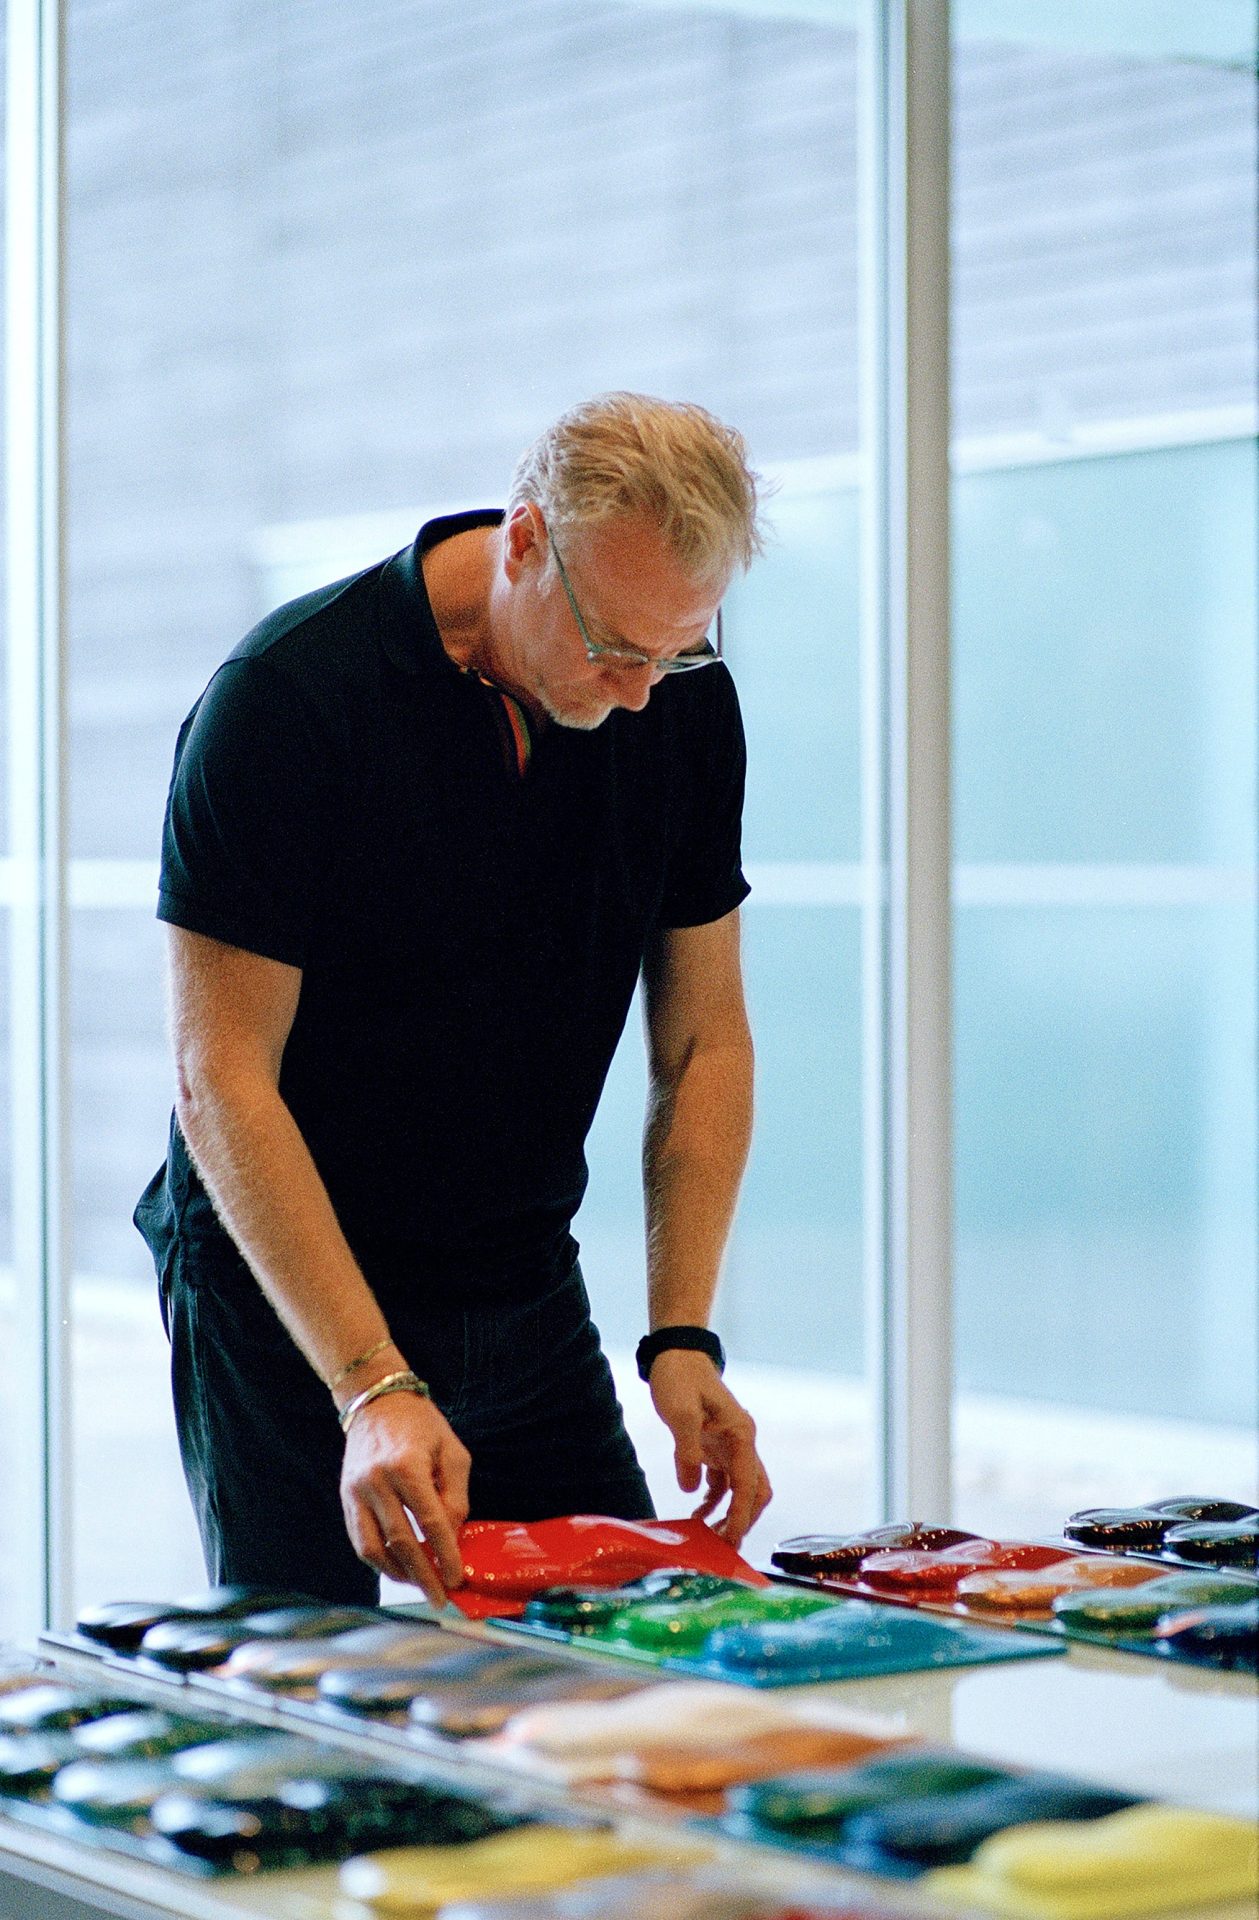 Marek studying car models in Obsessions: Design with Marek Reichman for A Collected Man London